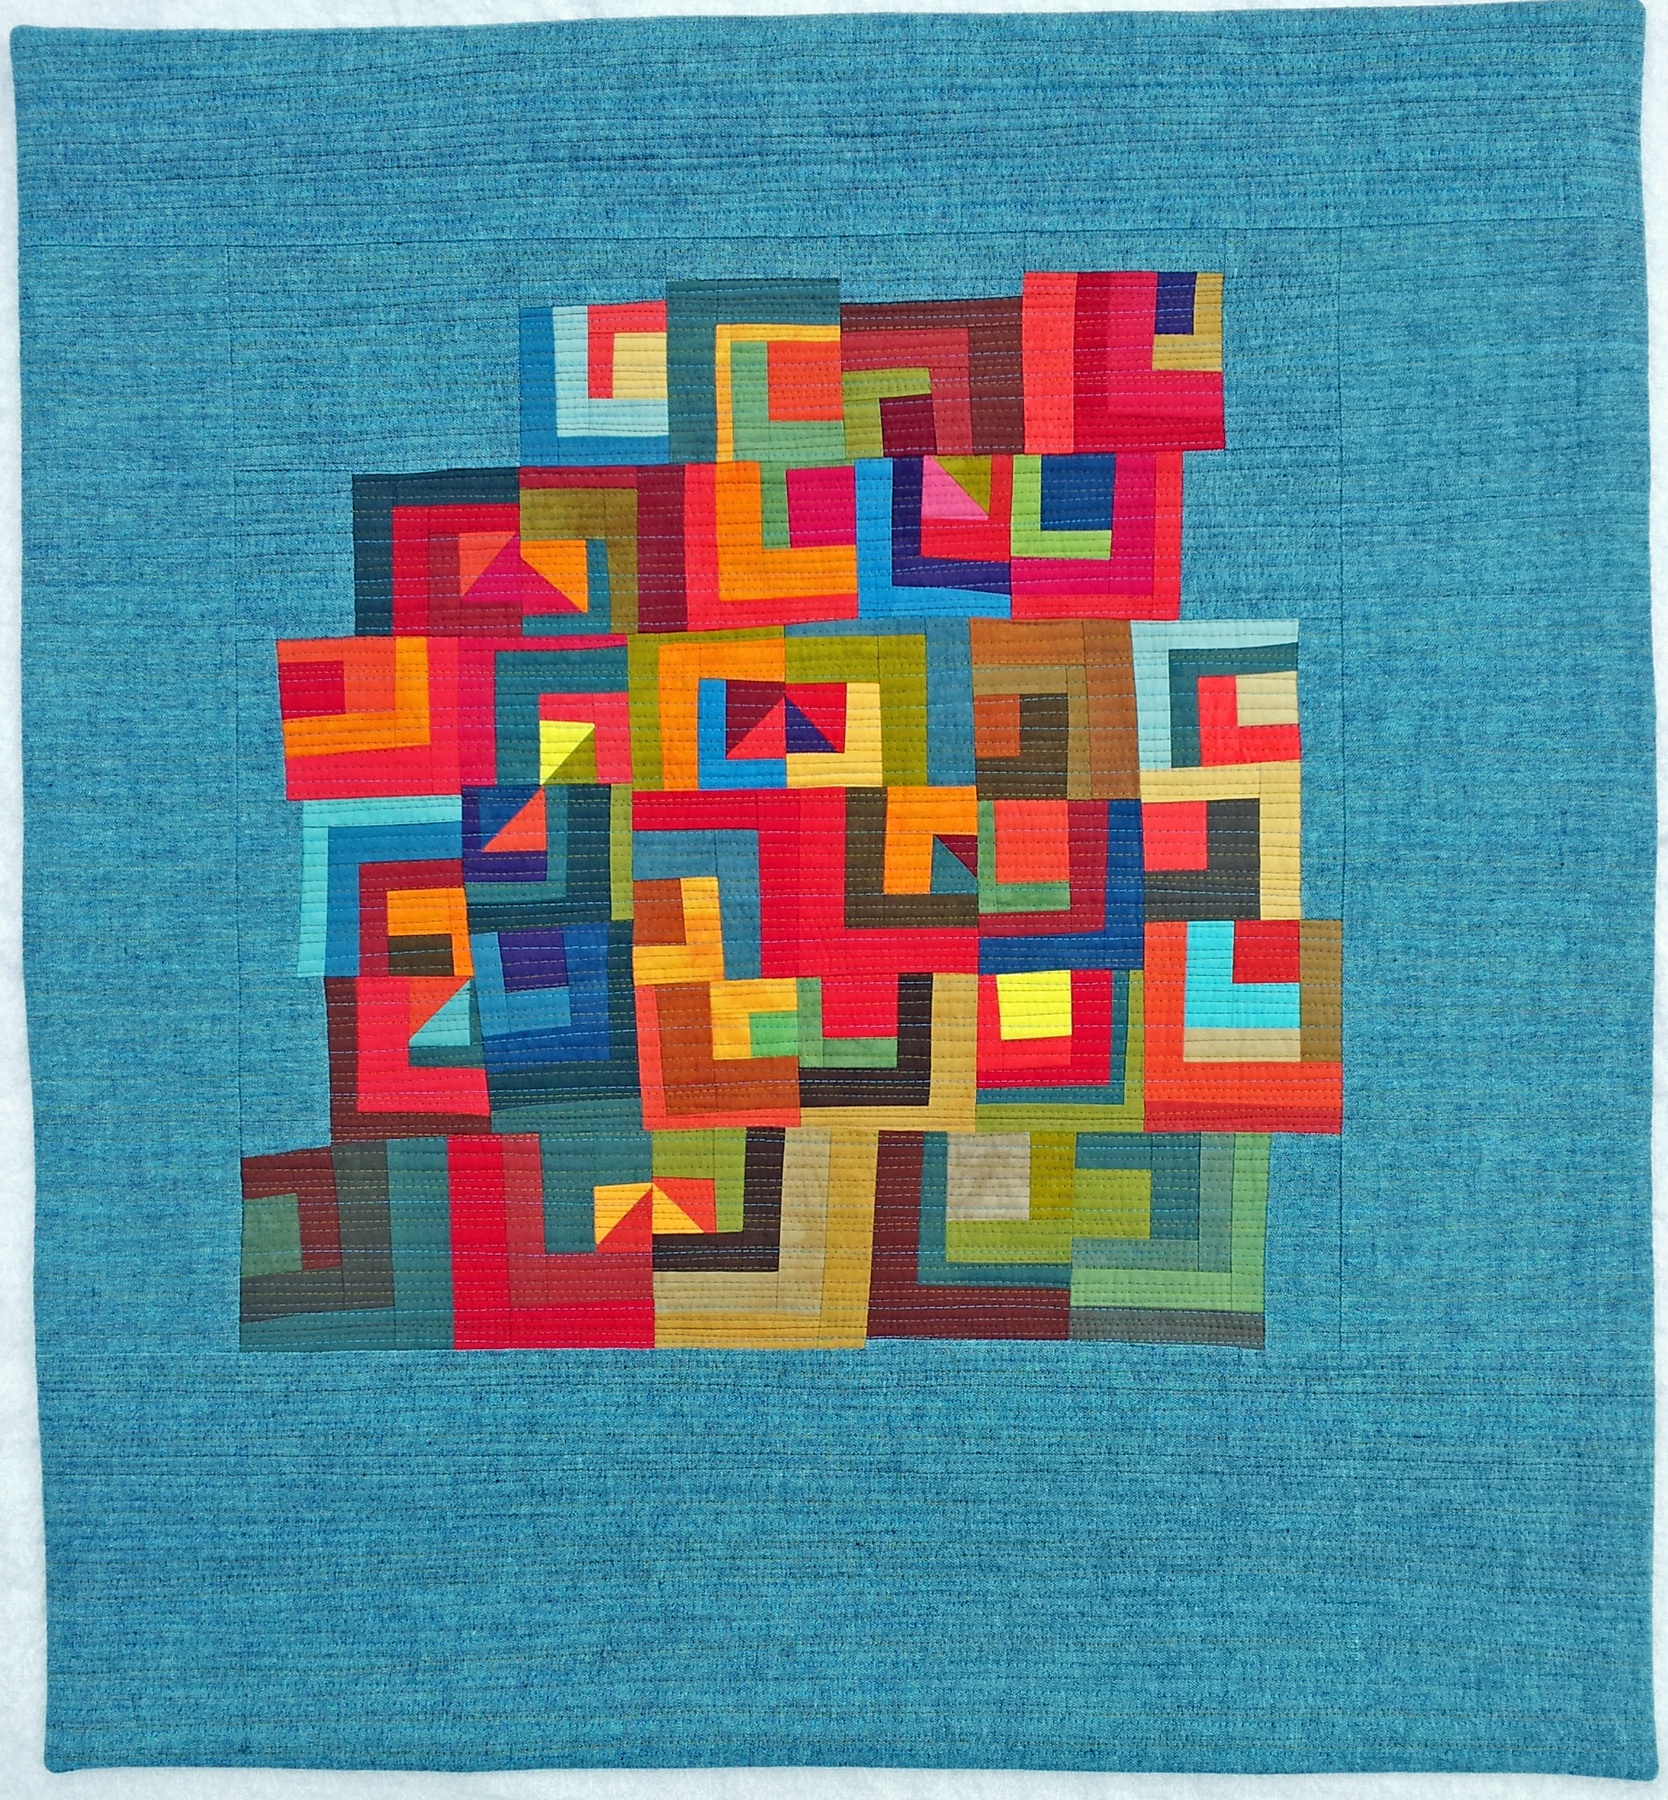 One of Marla Varner’s modern quilts that will exhibit at QuiltCon 2017 is called “Jubliant.” (Marla Varner)